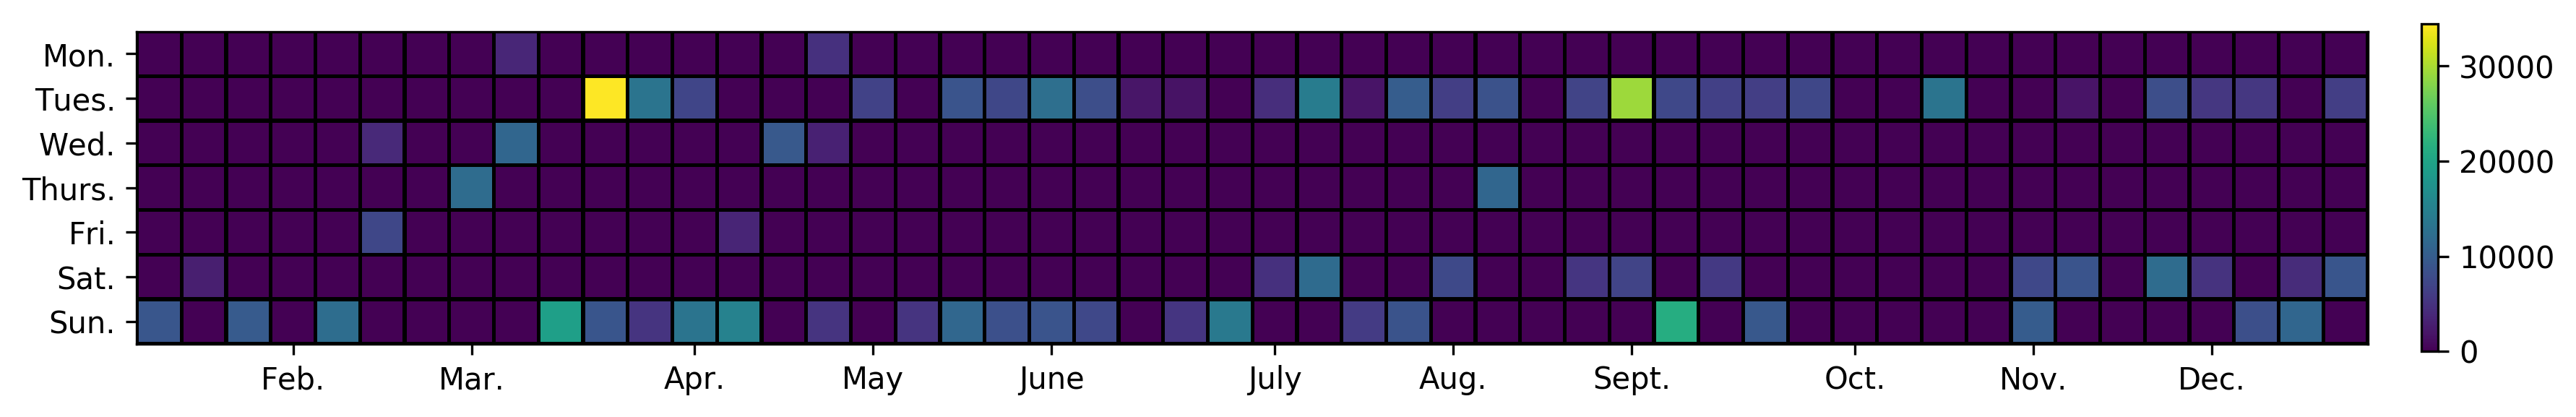 Calendar histogram #characters published per day